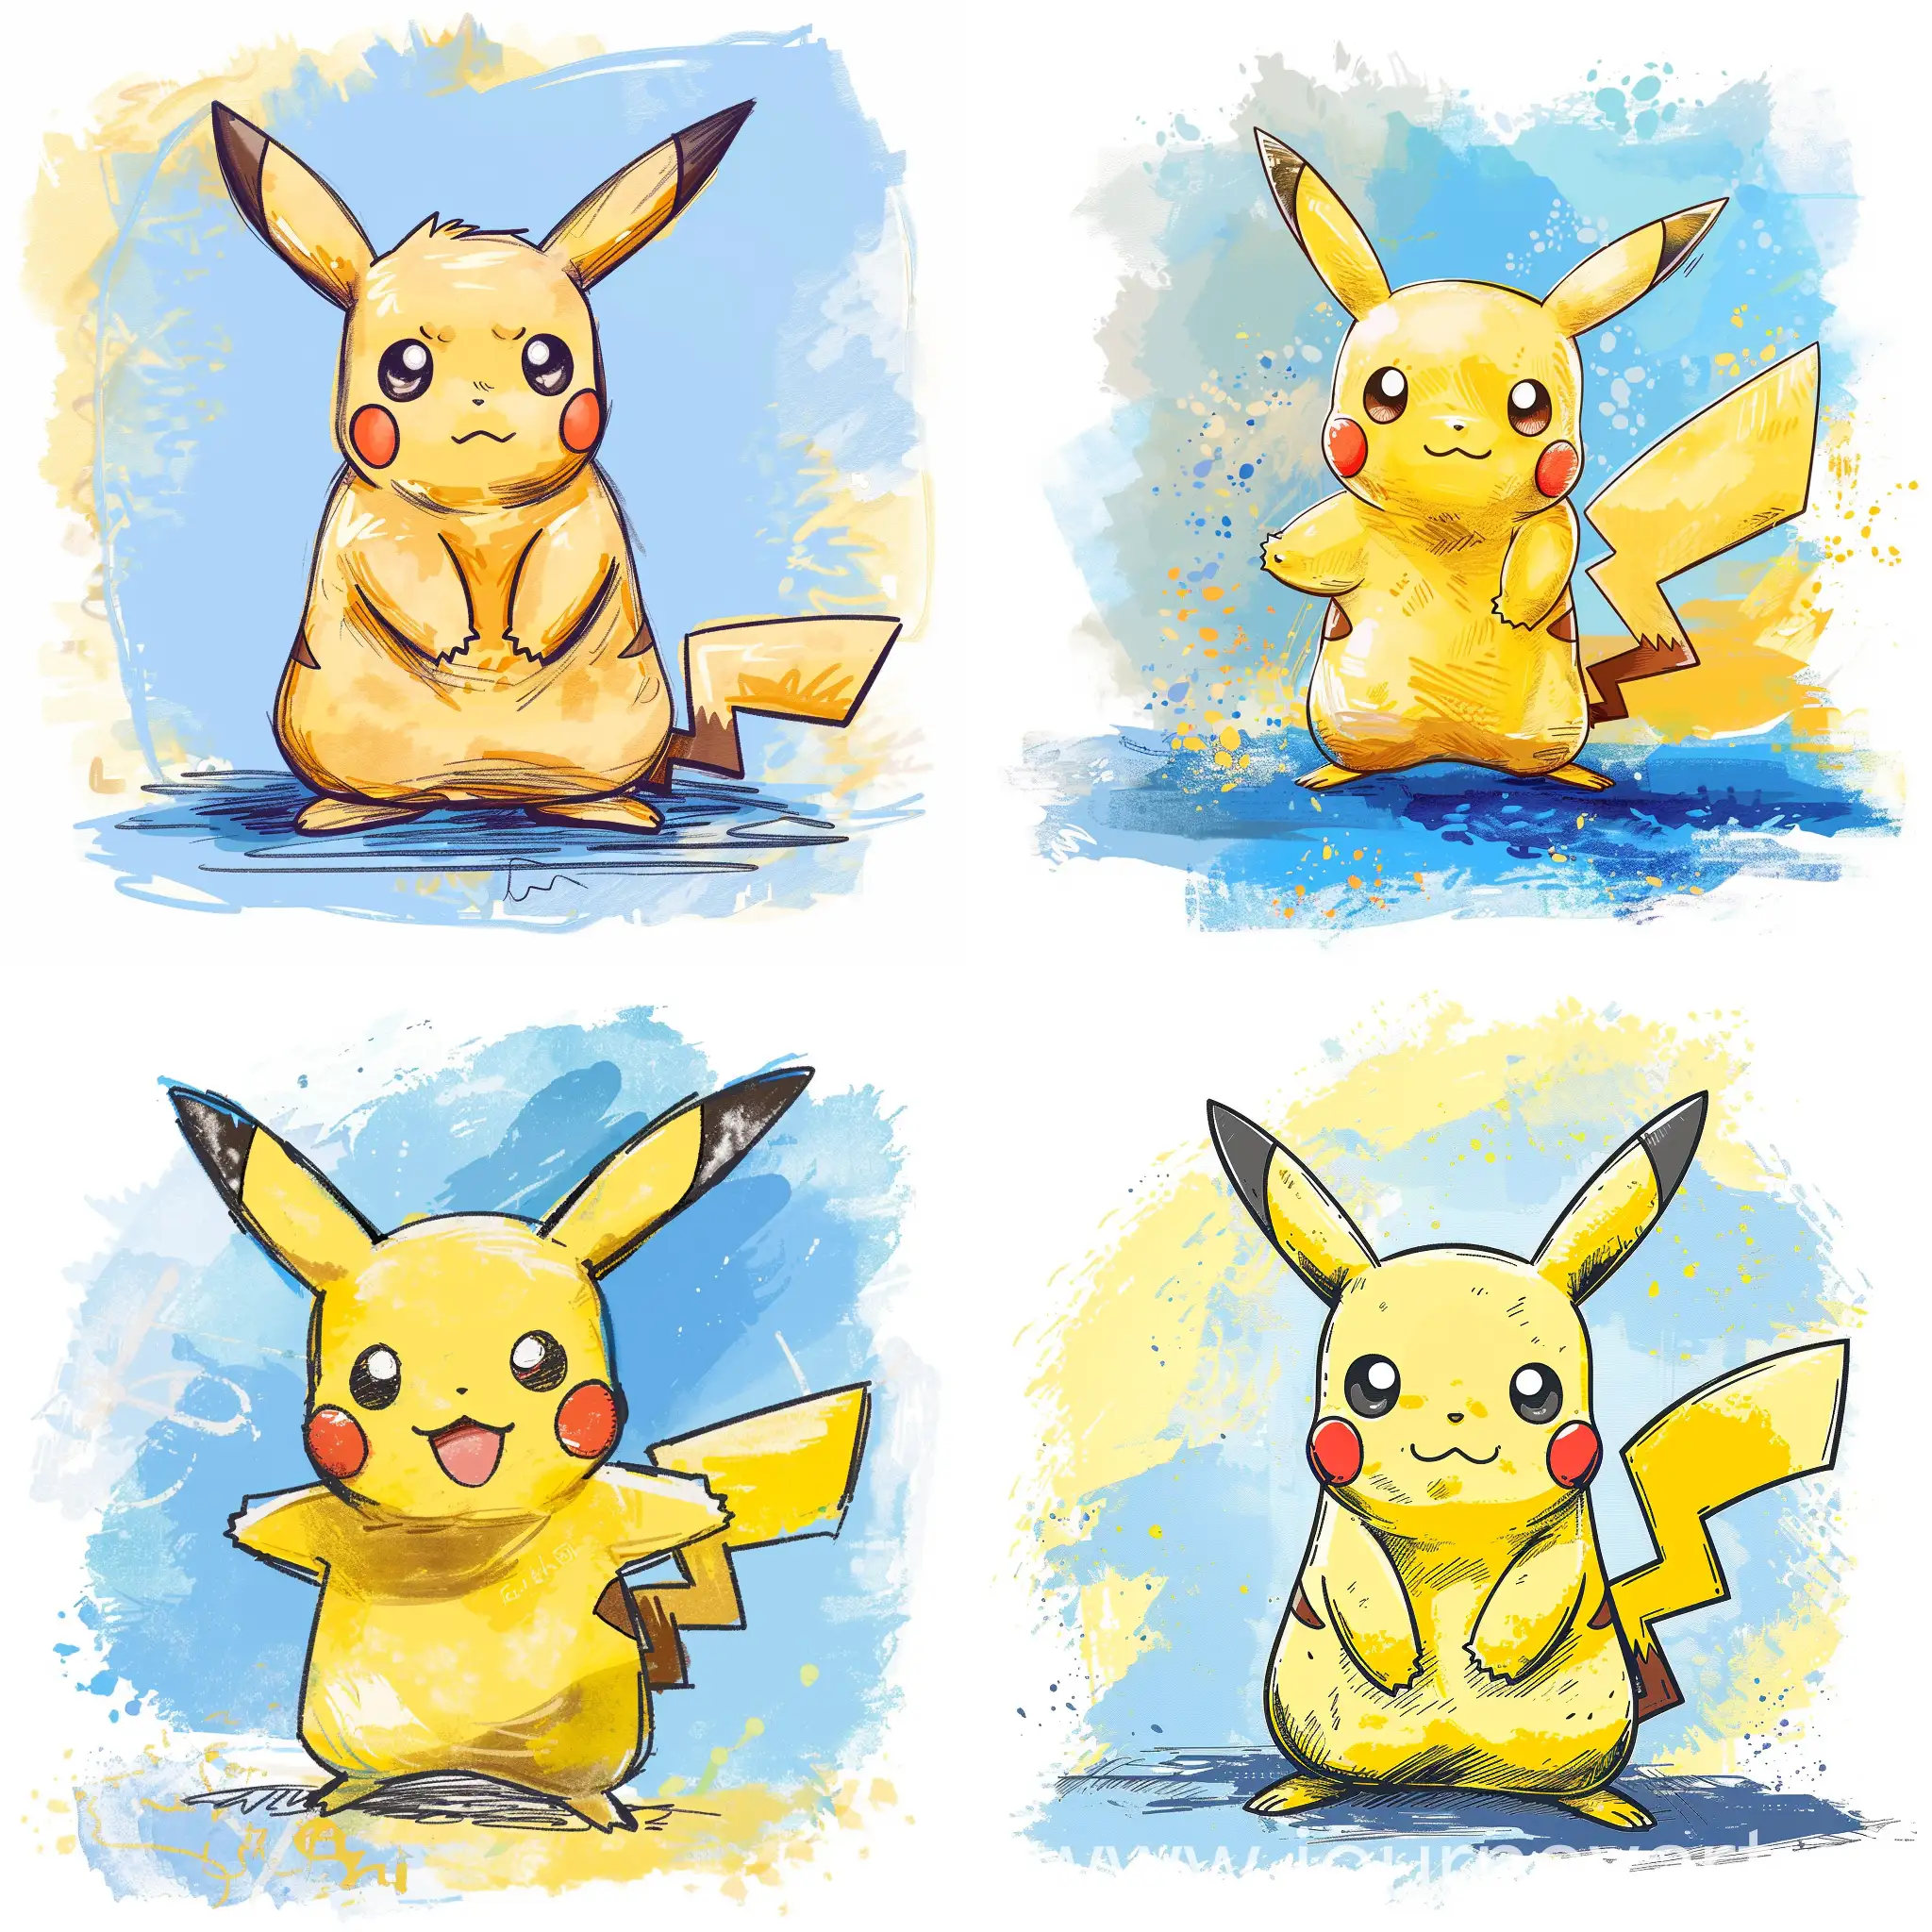 after Watterson style character,a cute Pikachu trying hard in a thick line hand-drawn style, plush feeling, vector file, watercolor, blue and yellow background , rough, minimalism, front view